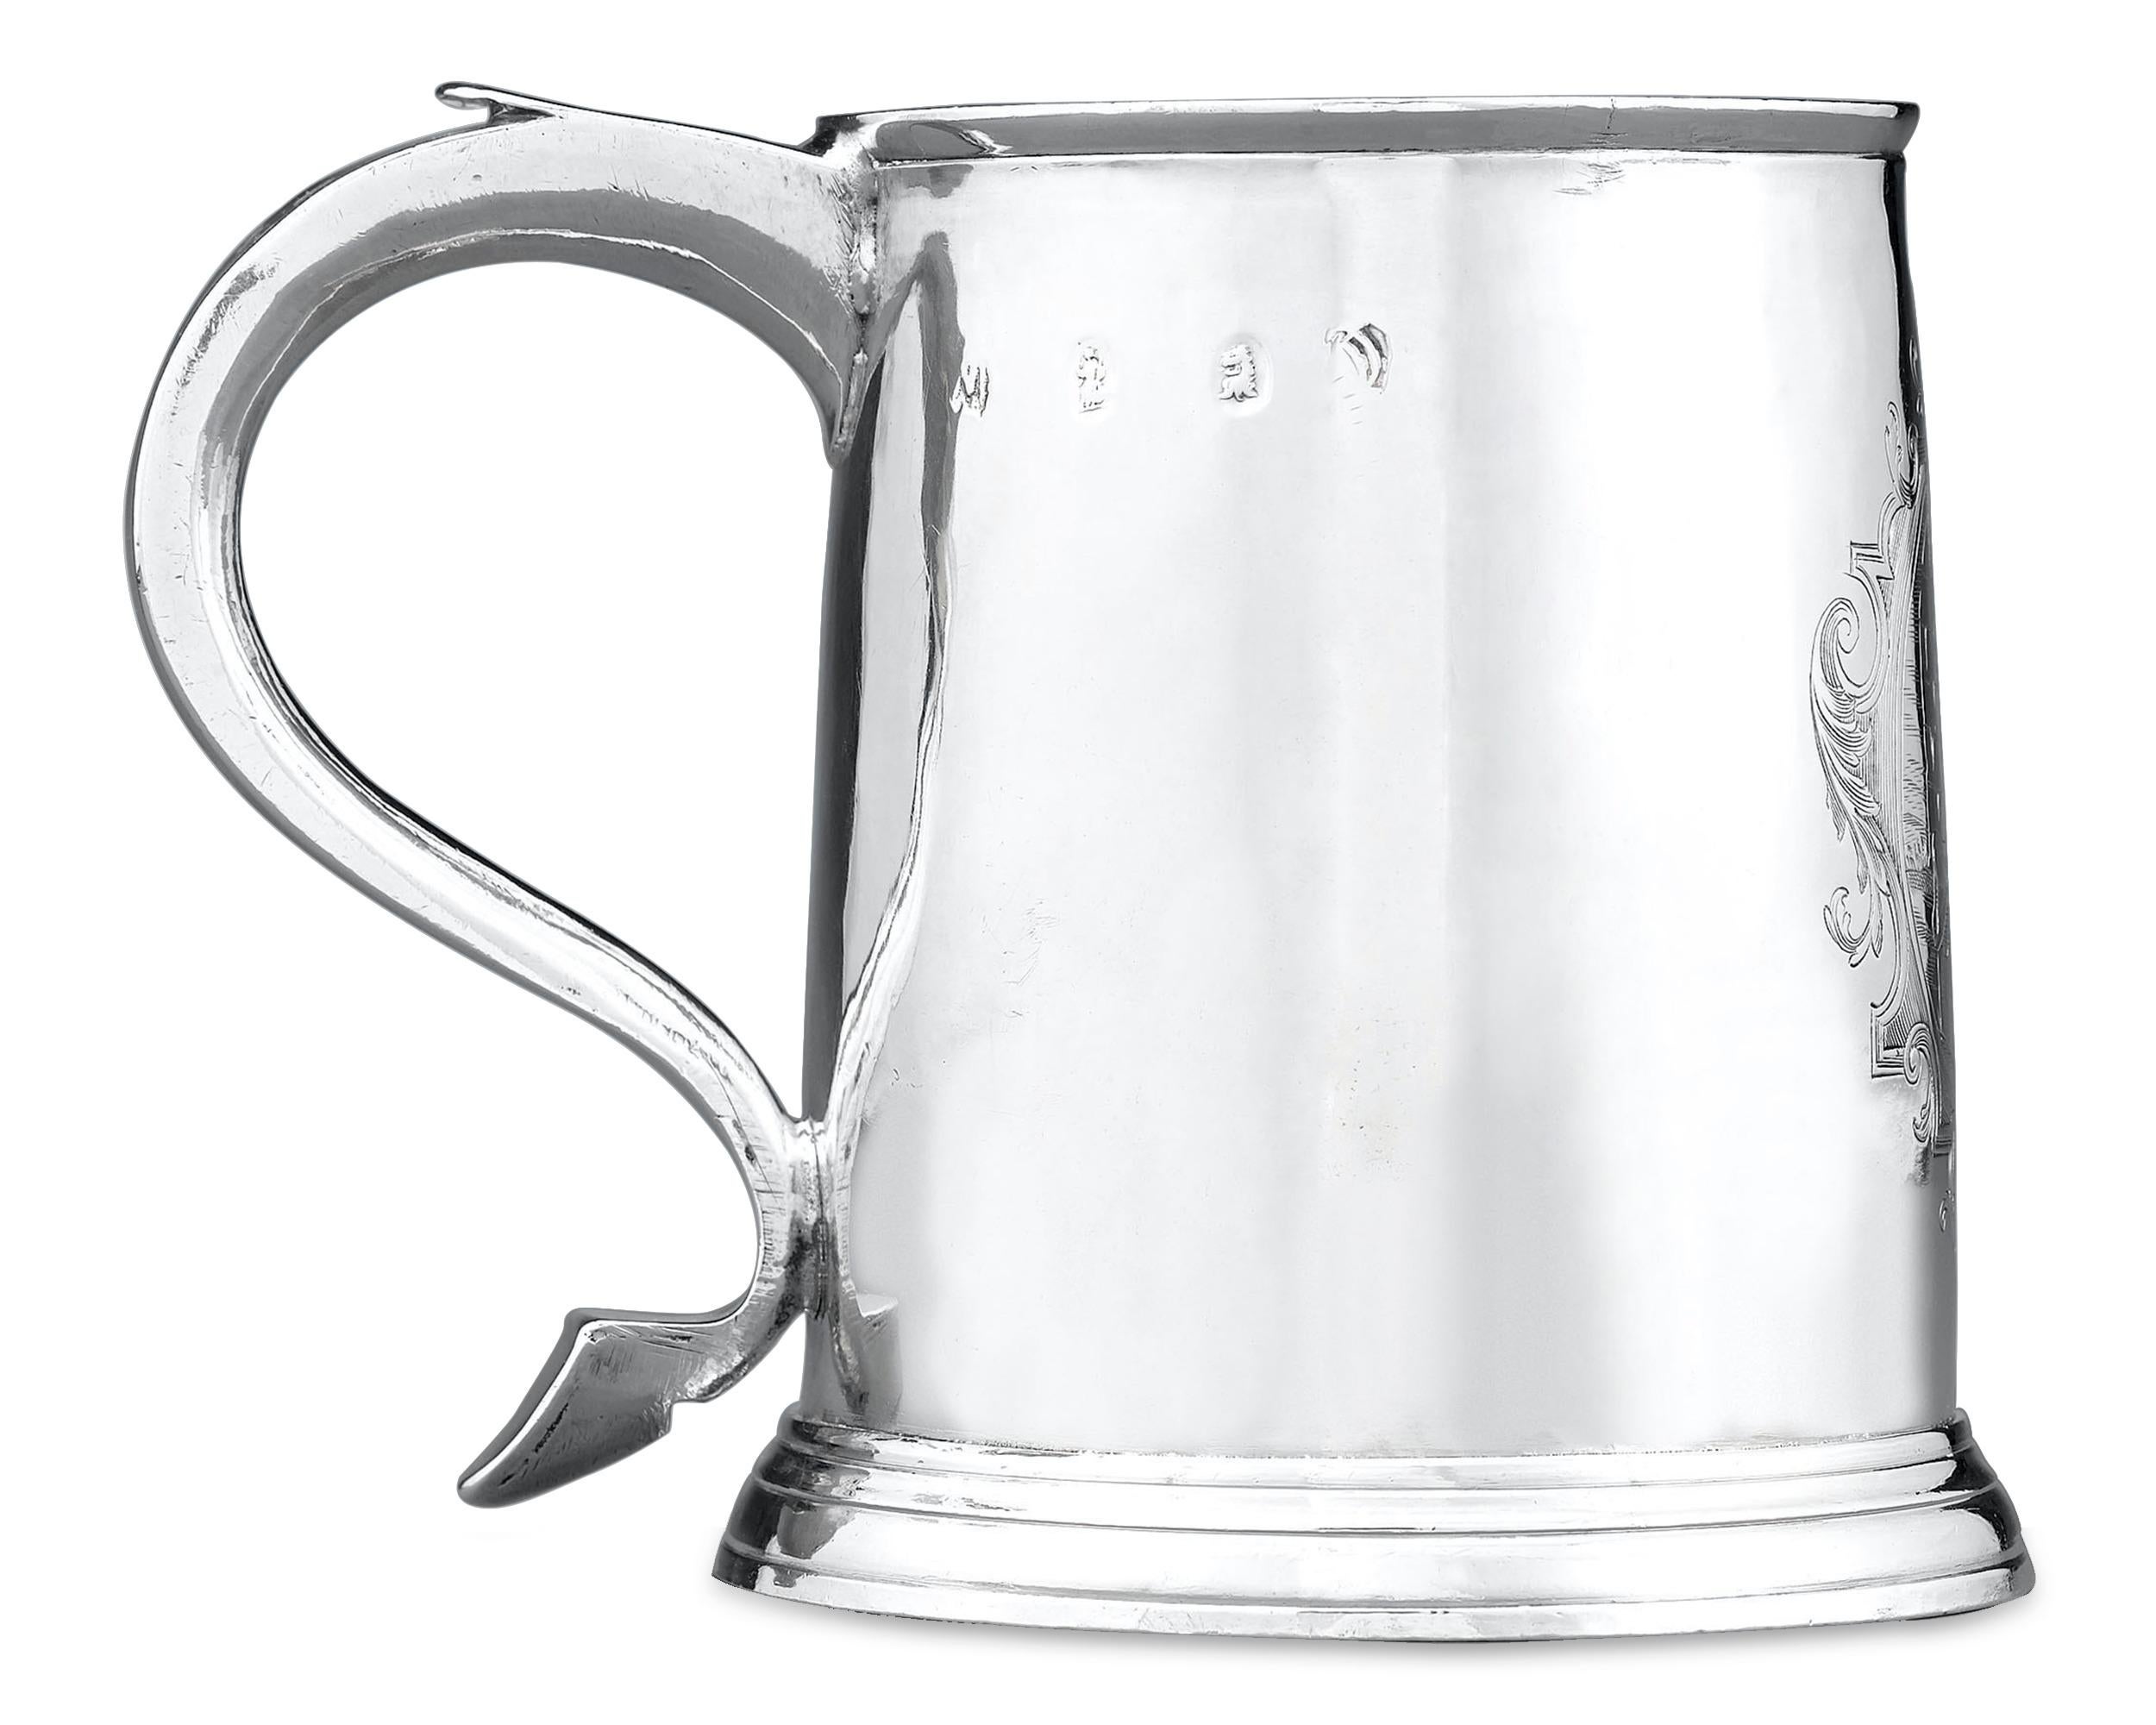 This fine English silver half-pint mug from the Queen Anne period bears the mark of London silversmith John Wisdome. The elegantly tapered, cylindrical form boasts a curious and marvellously detailed engraving of a Chinese gentleman in his native